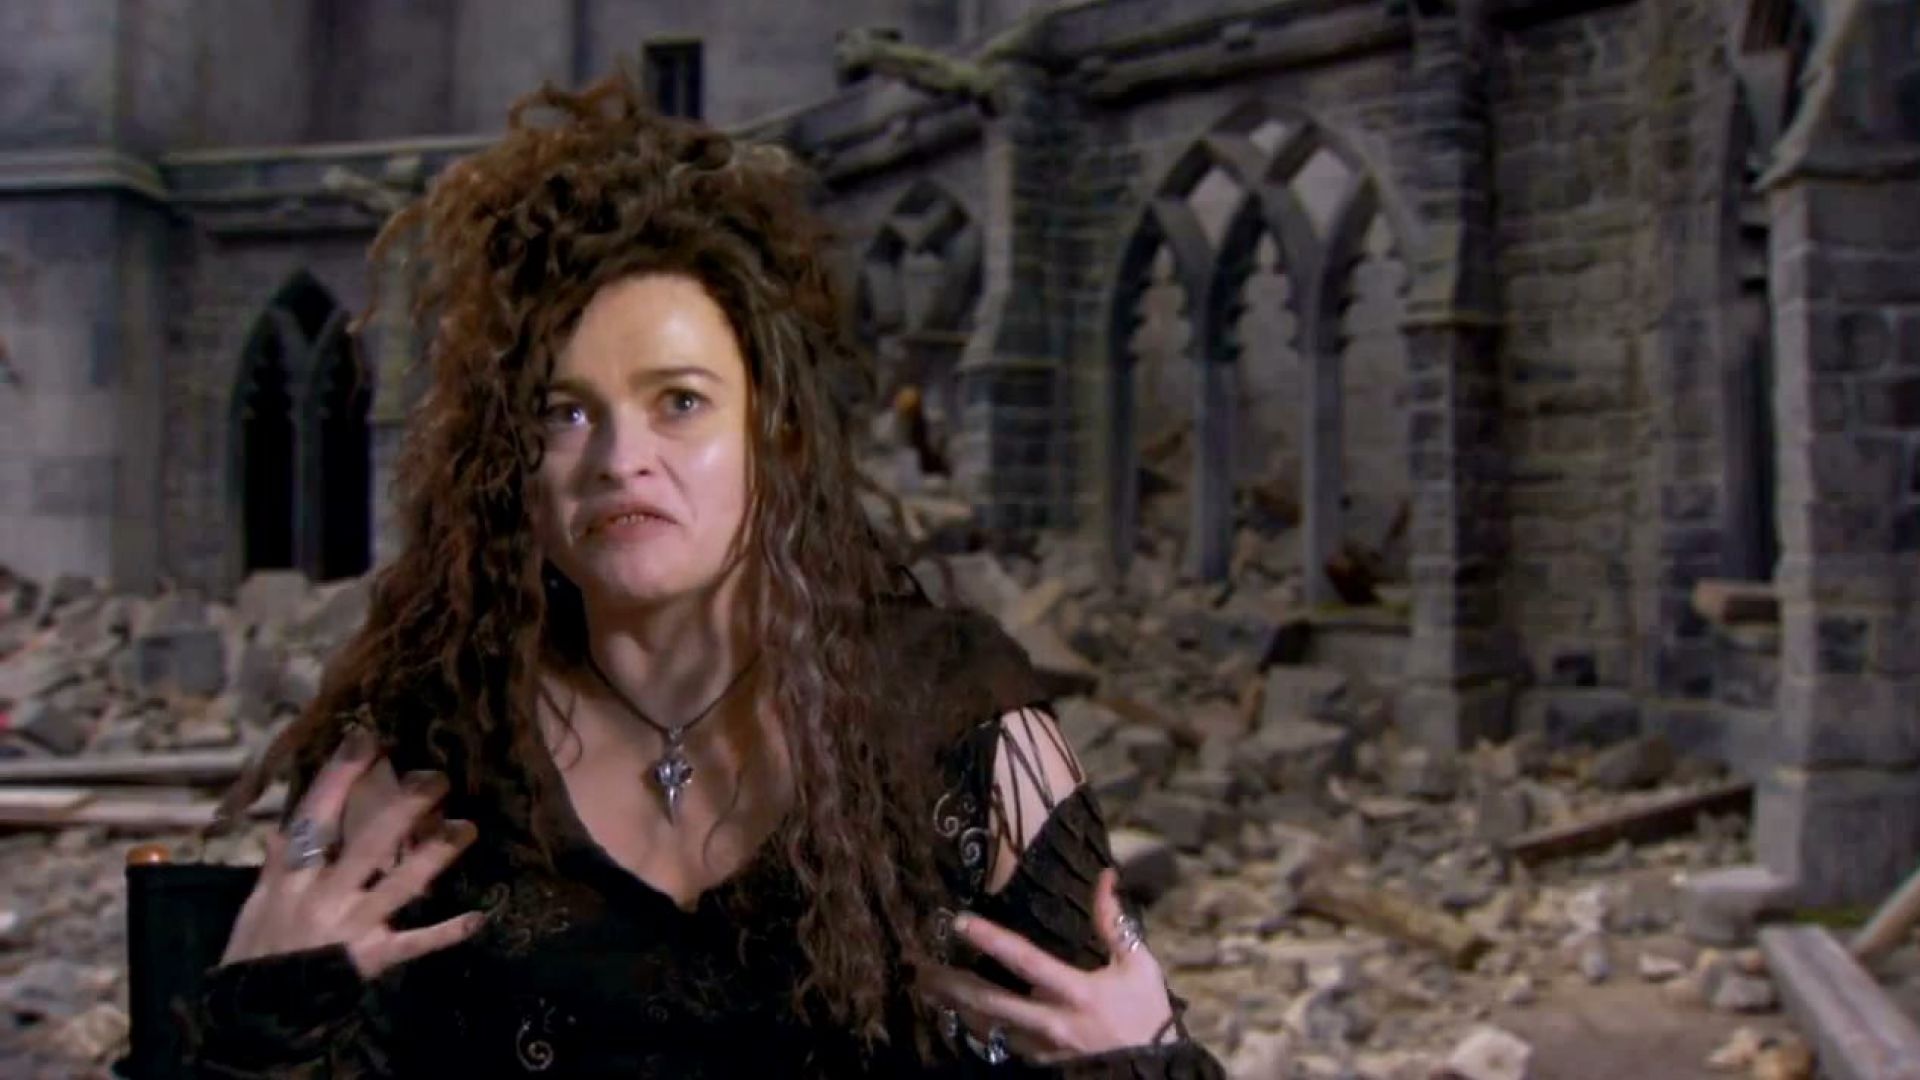 Helena Carter on playing Bellatrix in Harry Potter as therapy